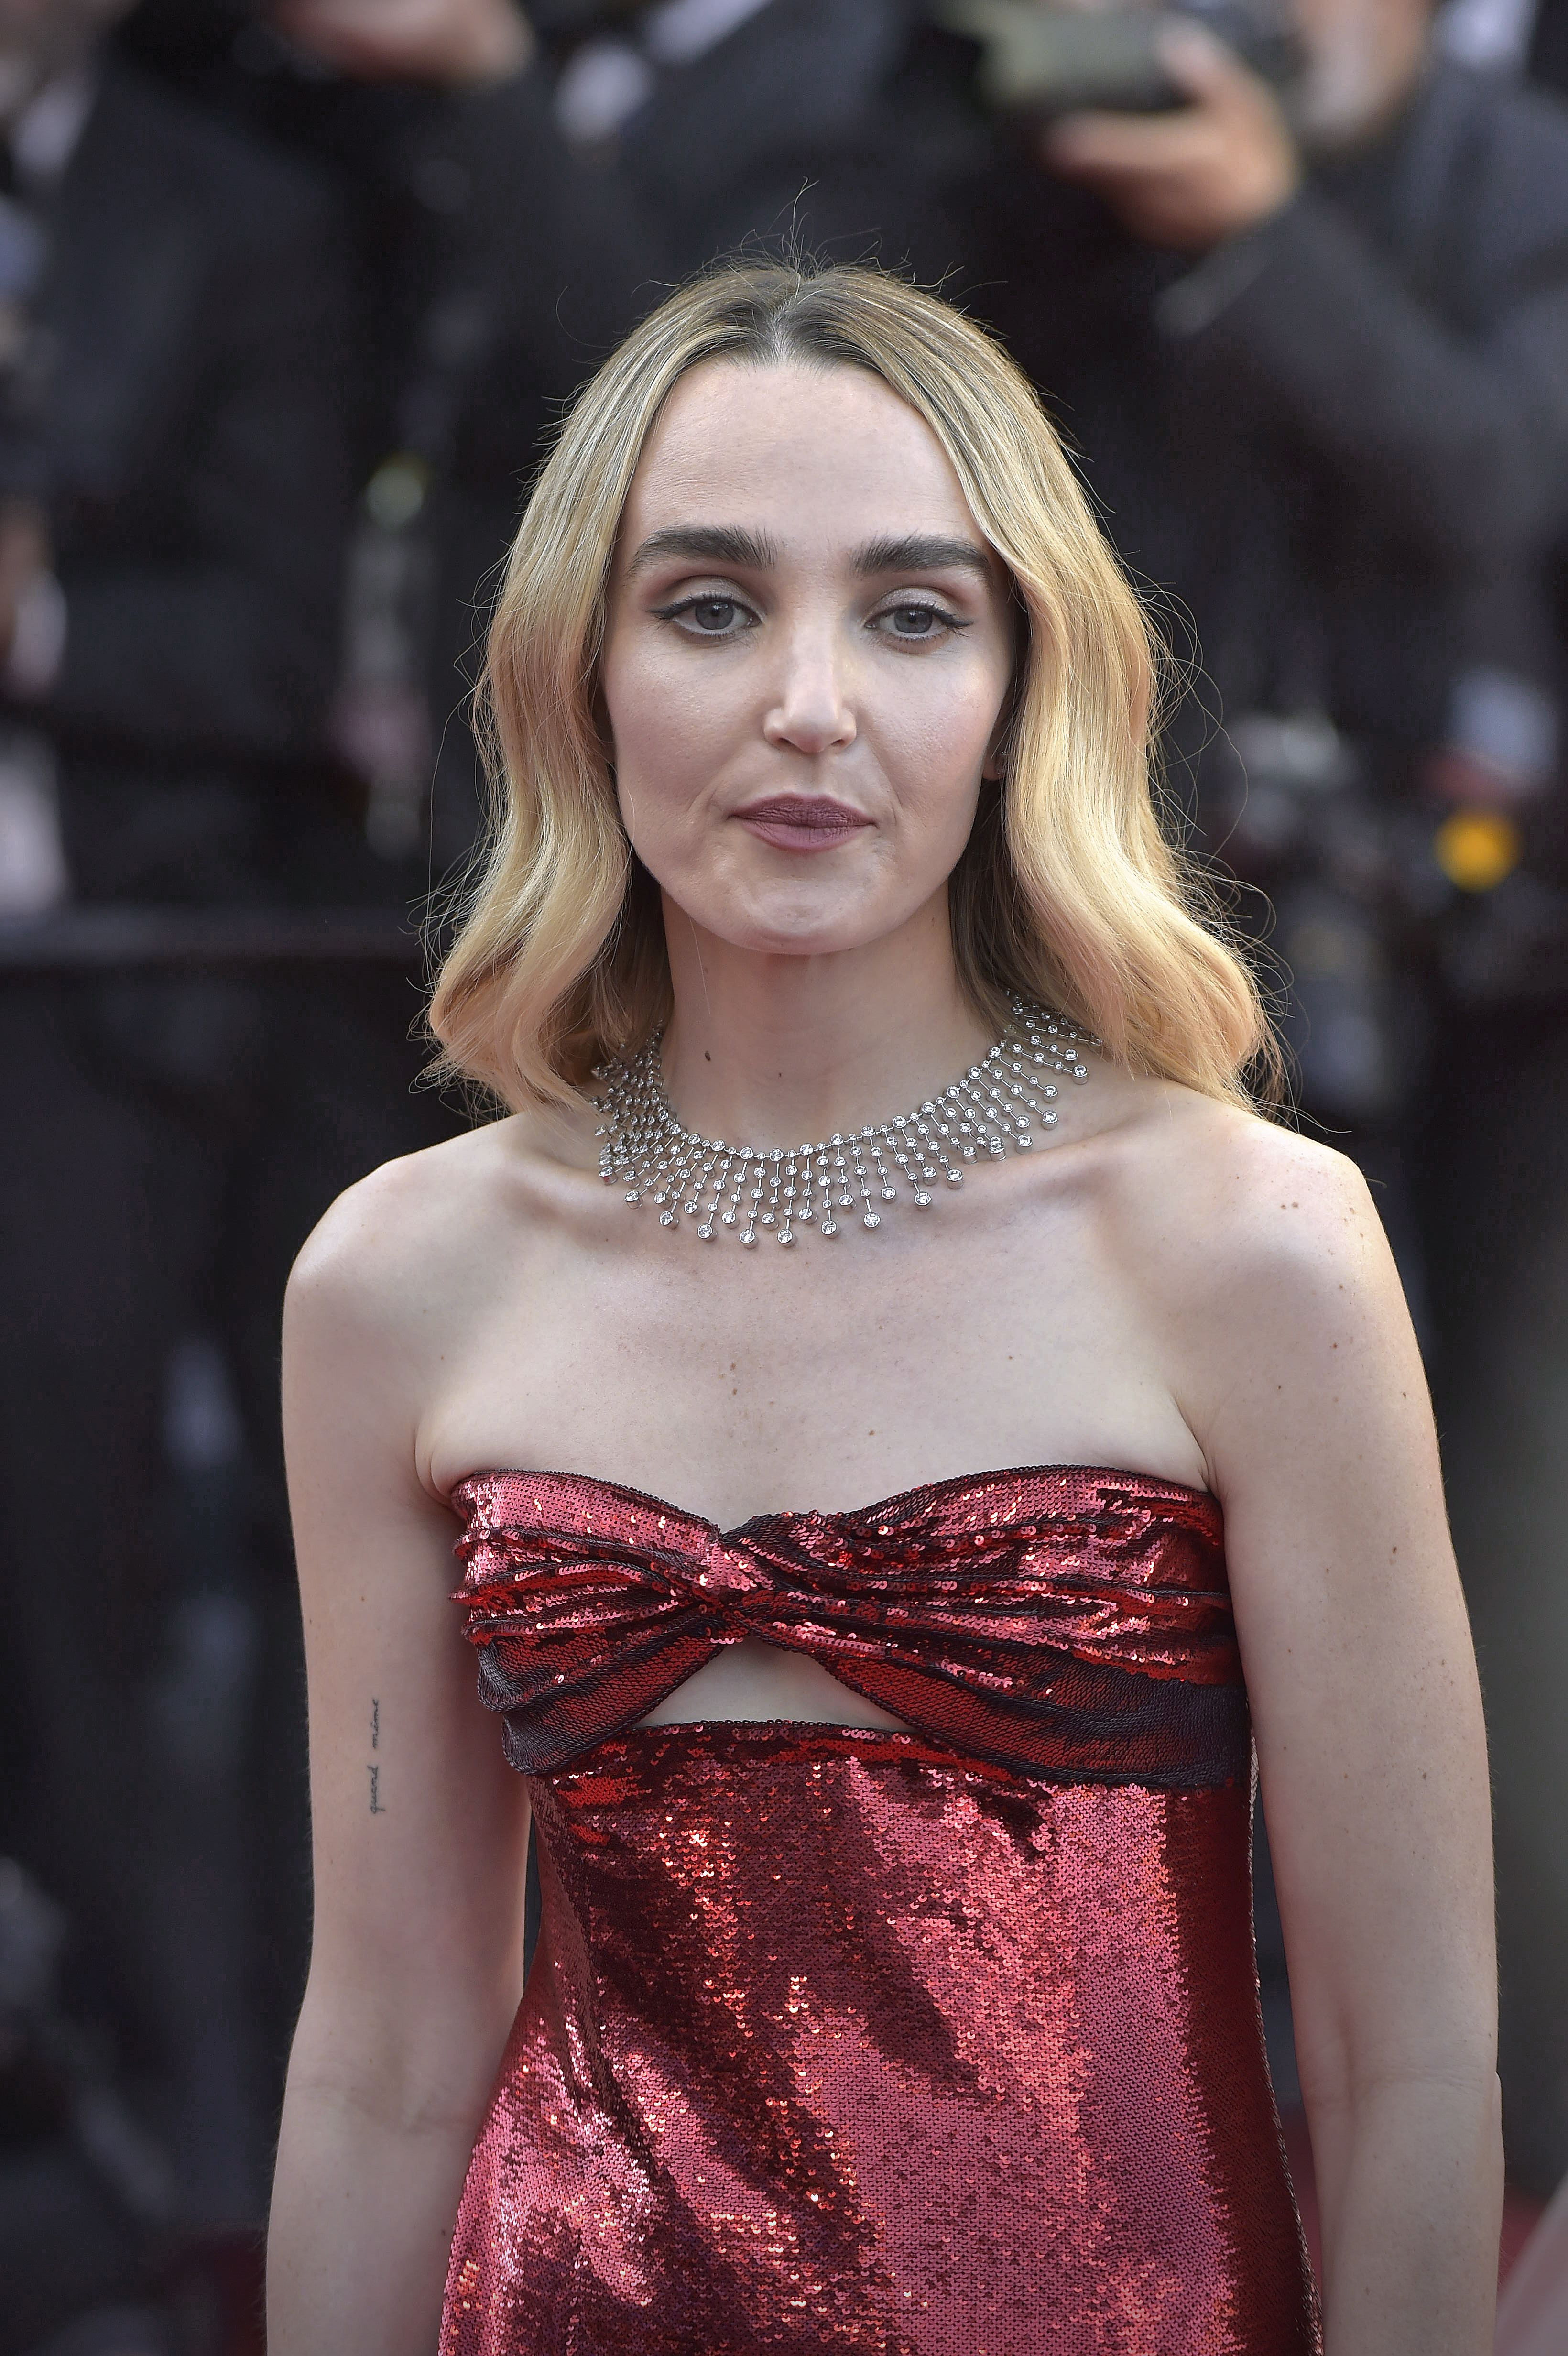 Chloe Fineman in a shimmering red strapless dress with a cutout at the chest and a pearl statement necklace at a red carpet event